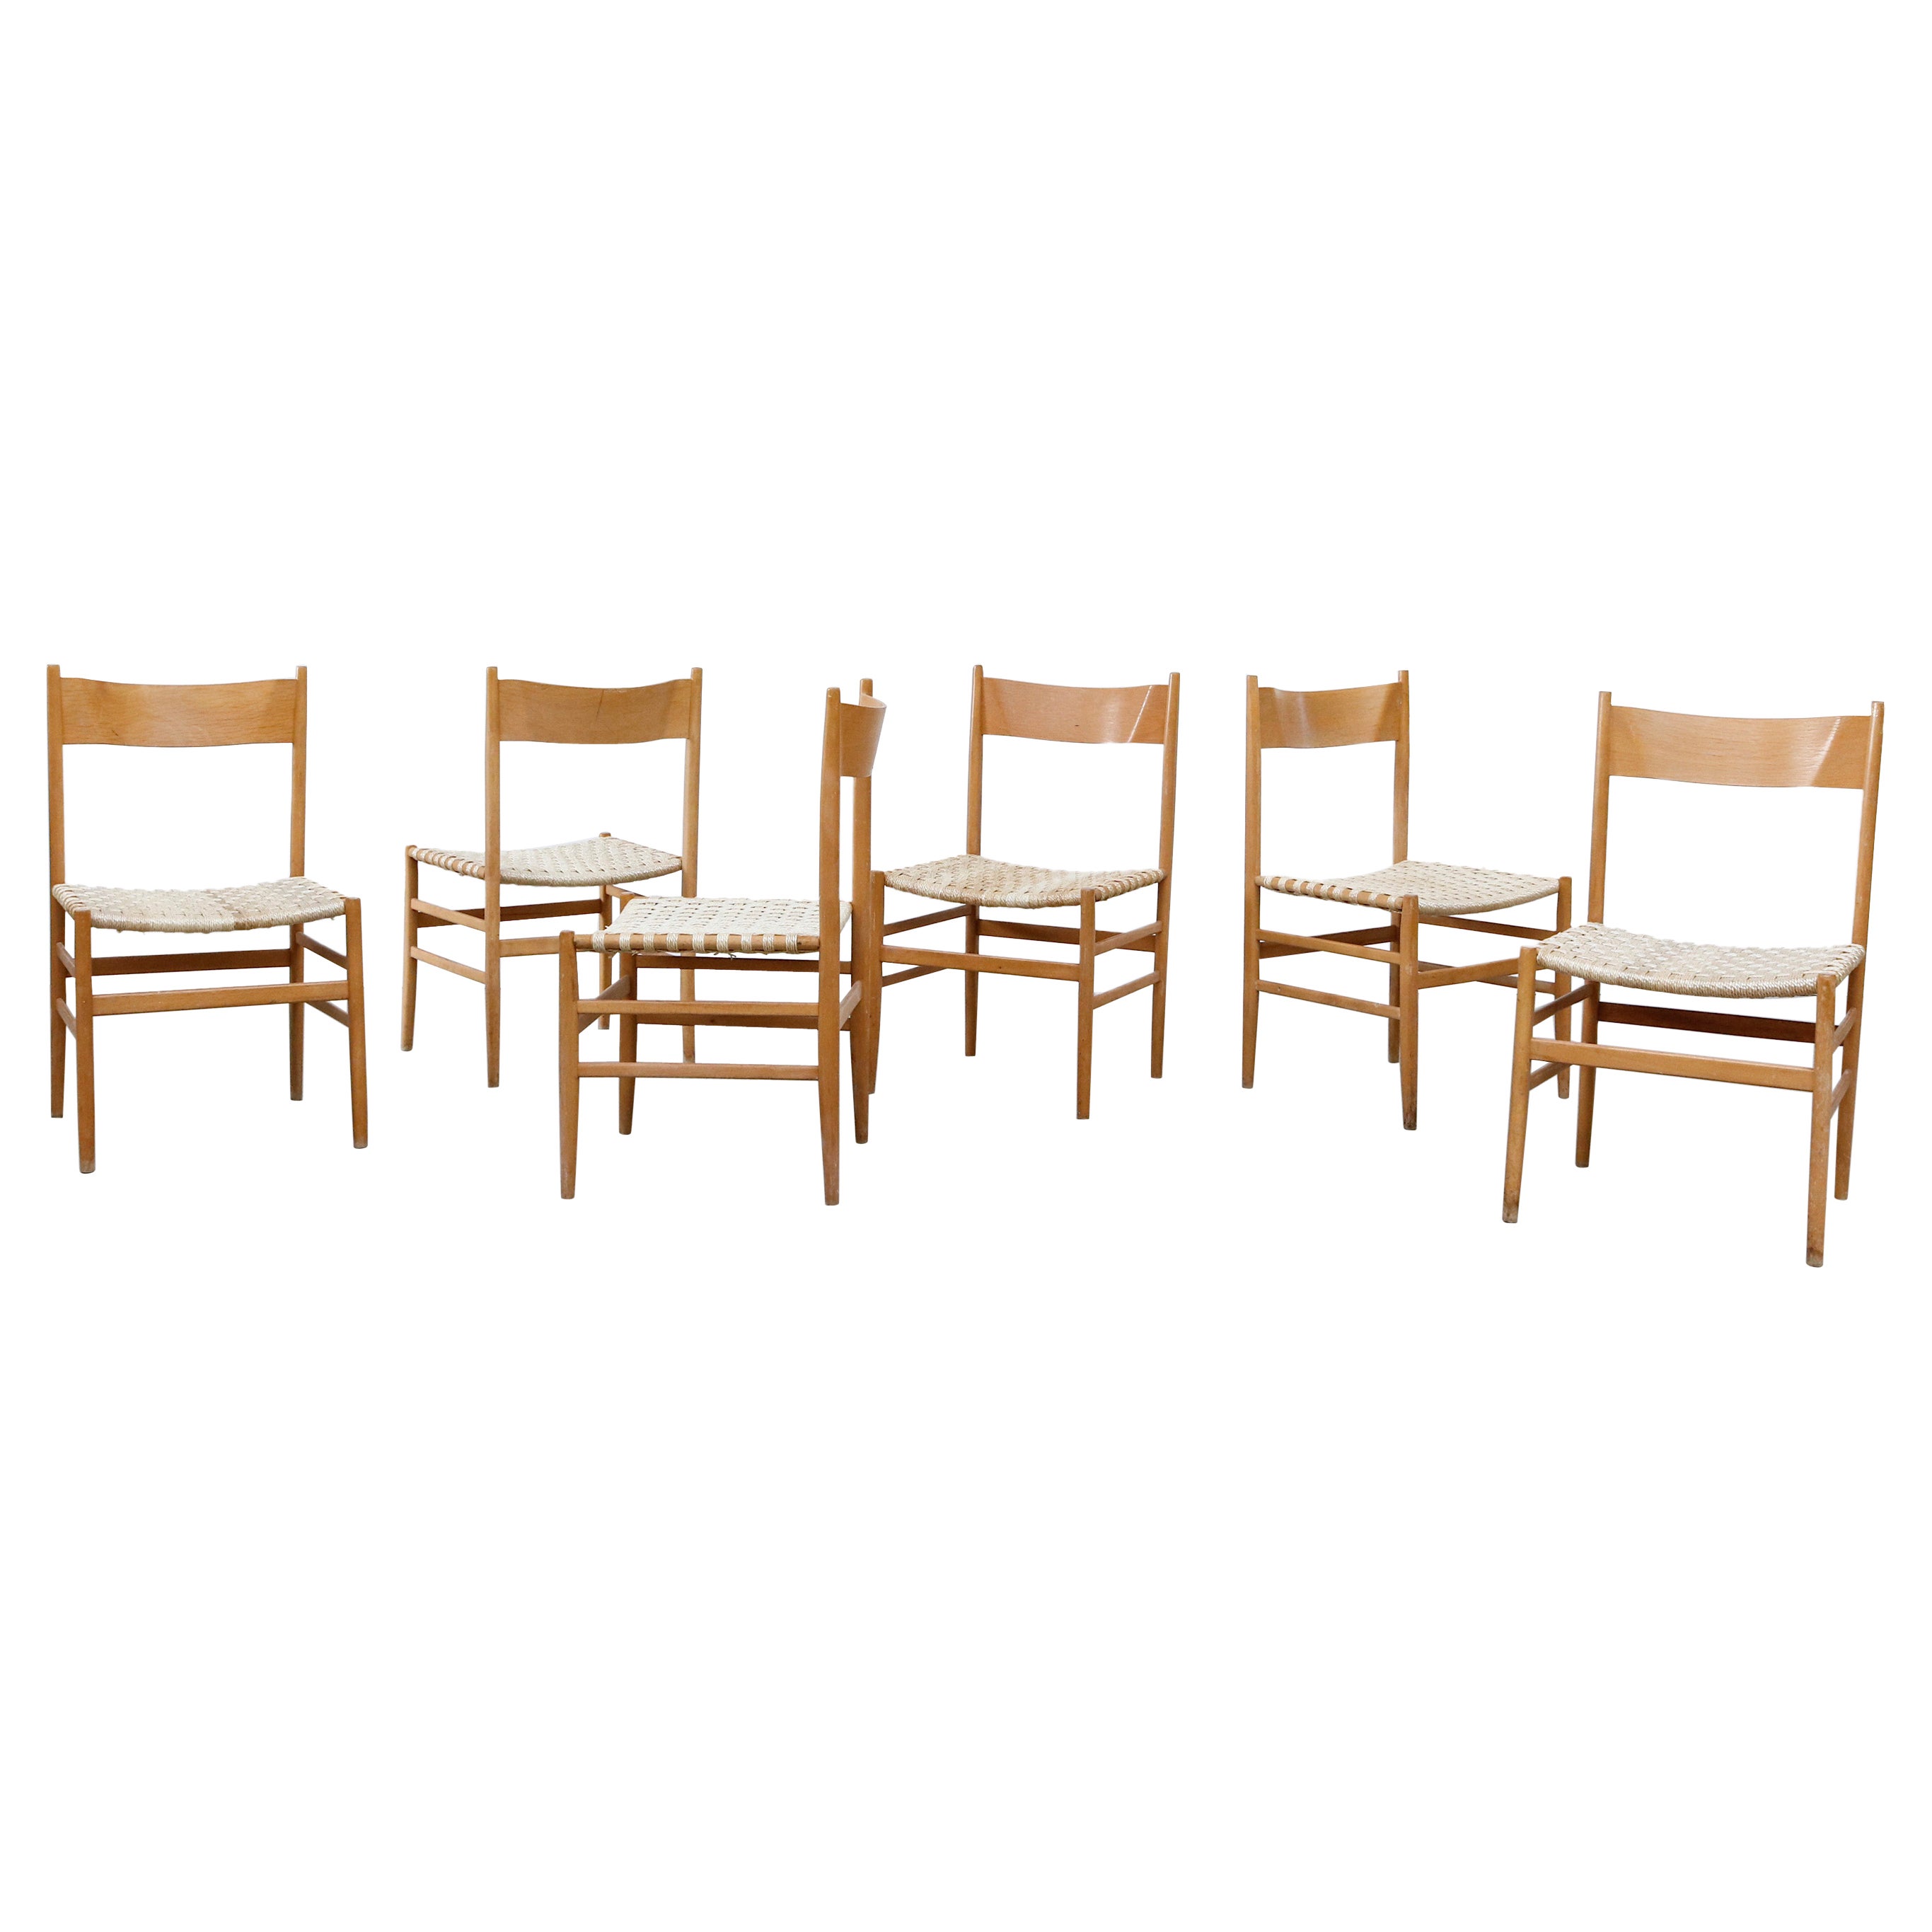 Hans Wegner Inspired Danish Blonde Dining Chairs with Woven Rope Seats